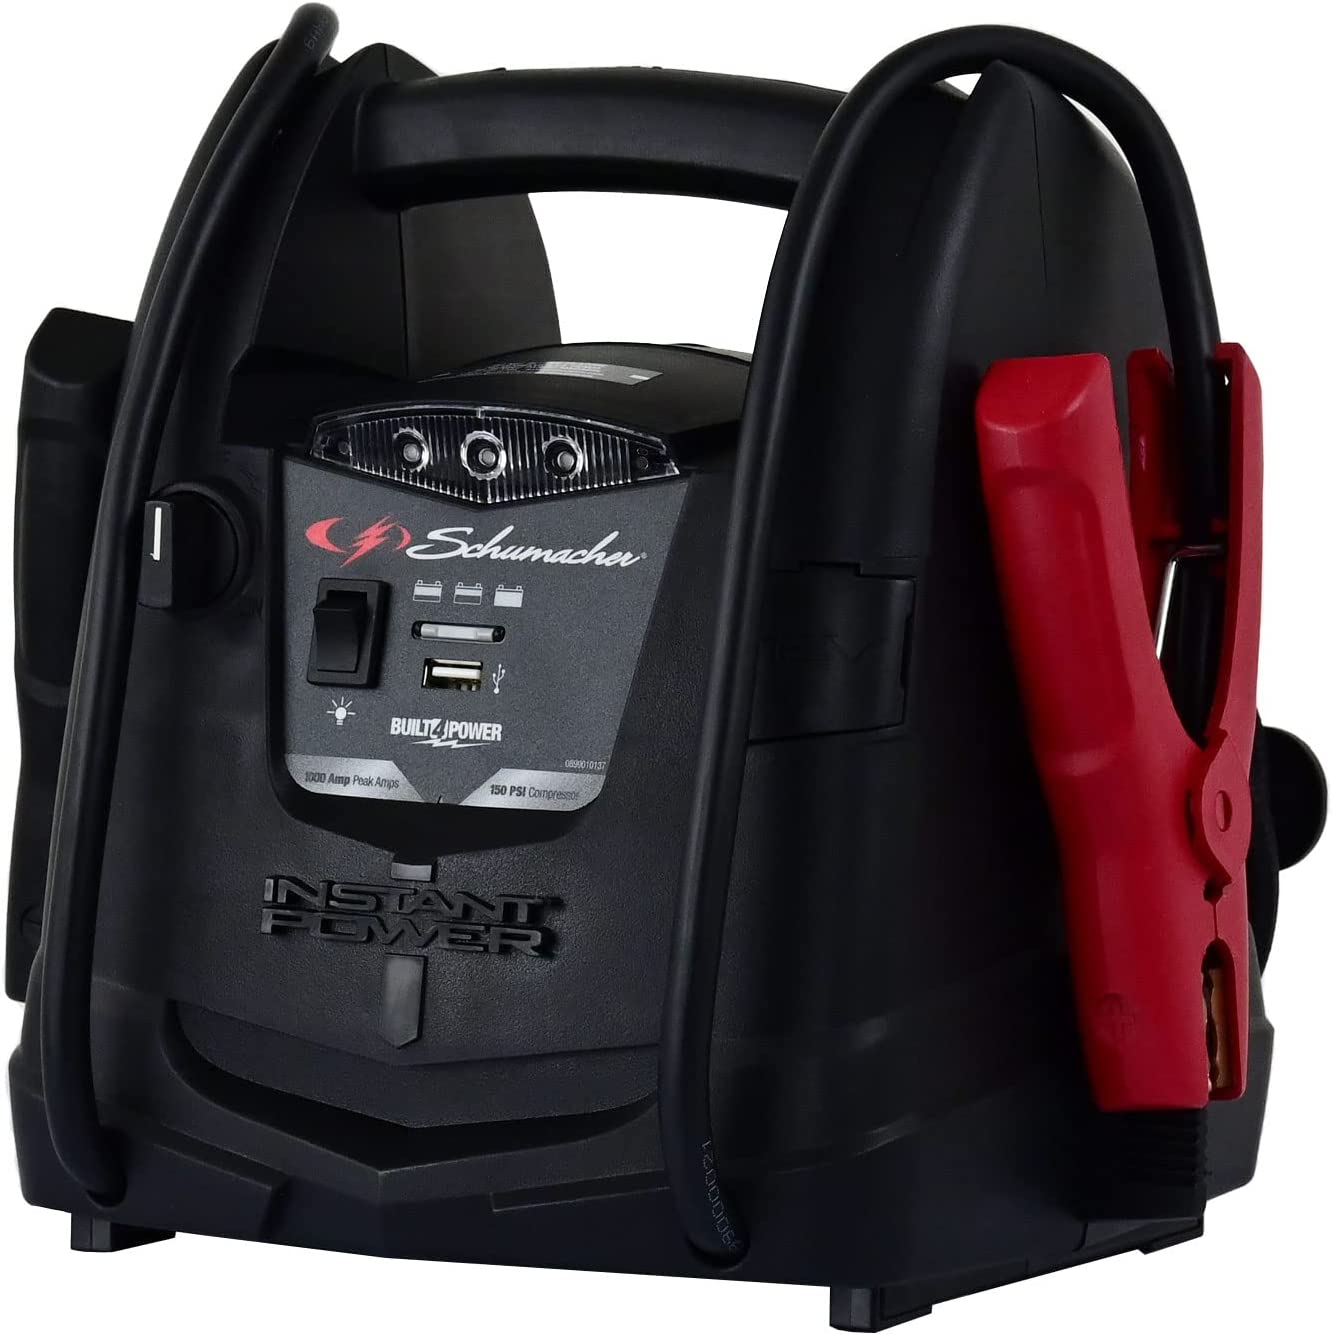 Schumacher SJ1330 Rechargeable AGM Jump Starter for Gas, Diesel Vehicles - 1000 Amps with Air Compressor and 12V DC, USB Power Station